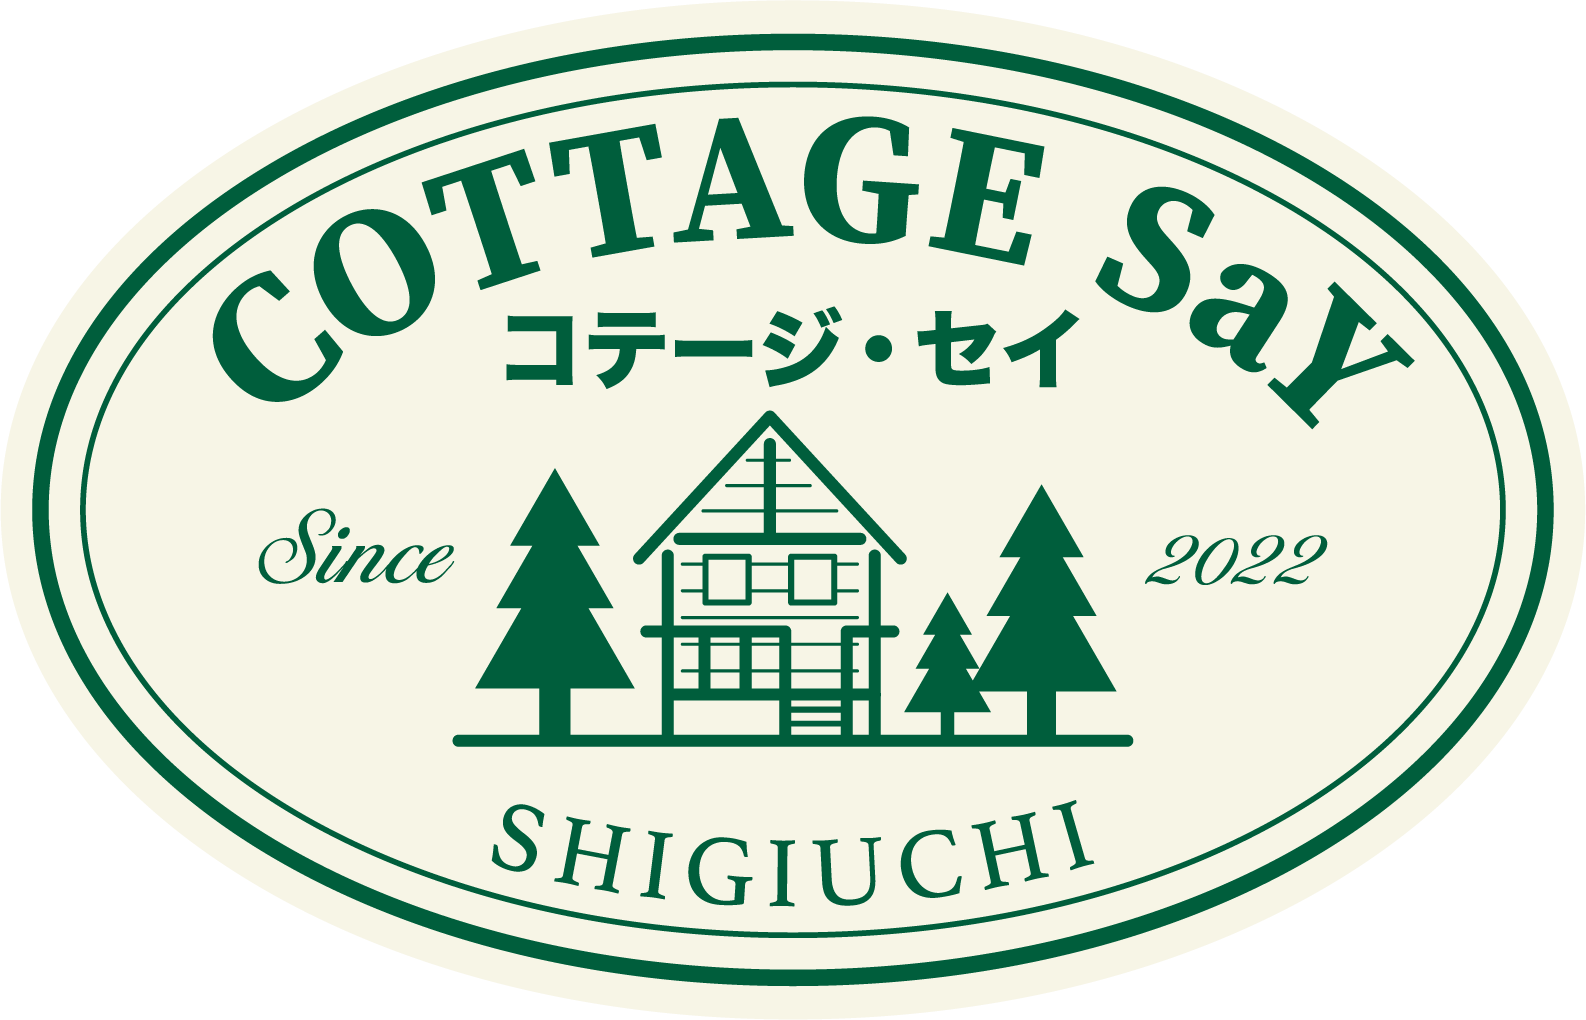 COTTAGE SaY